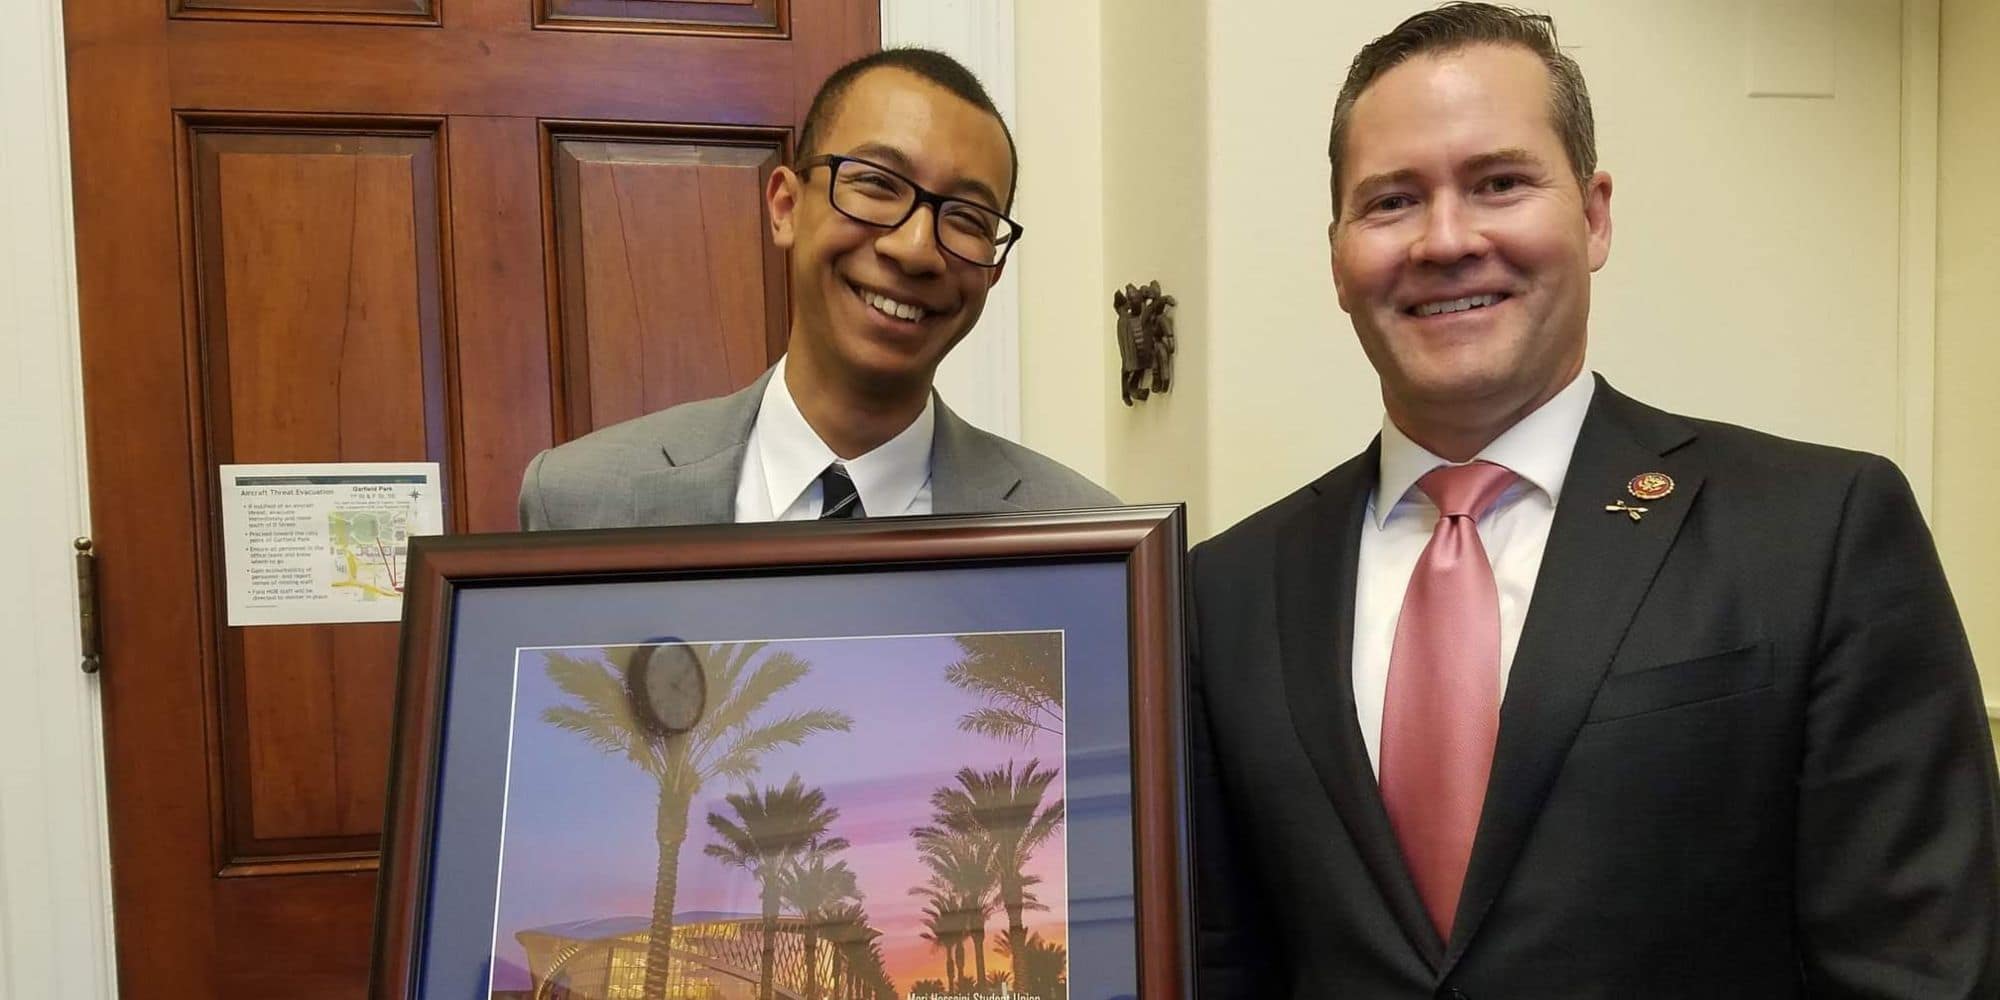 Dwayne Clark holds a photo of Embry-Riddle's student union with Rep. Michael Waltz (FL-6). (Photo: Dwayne Clark)